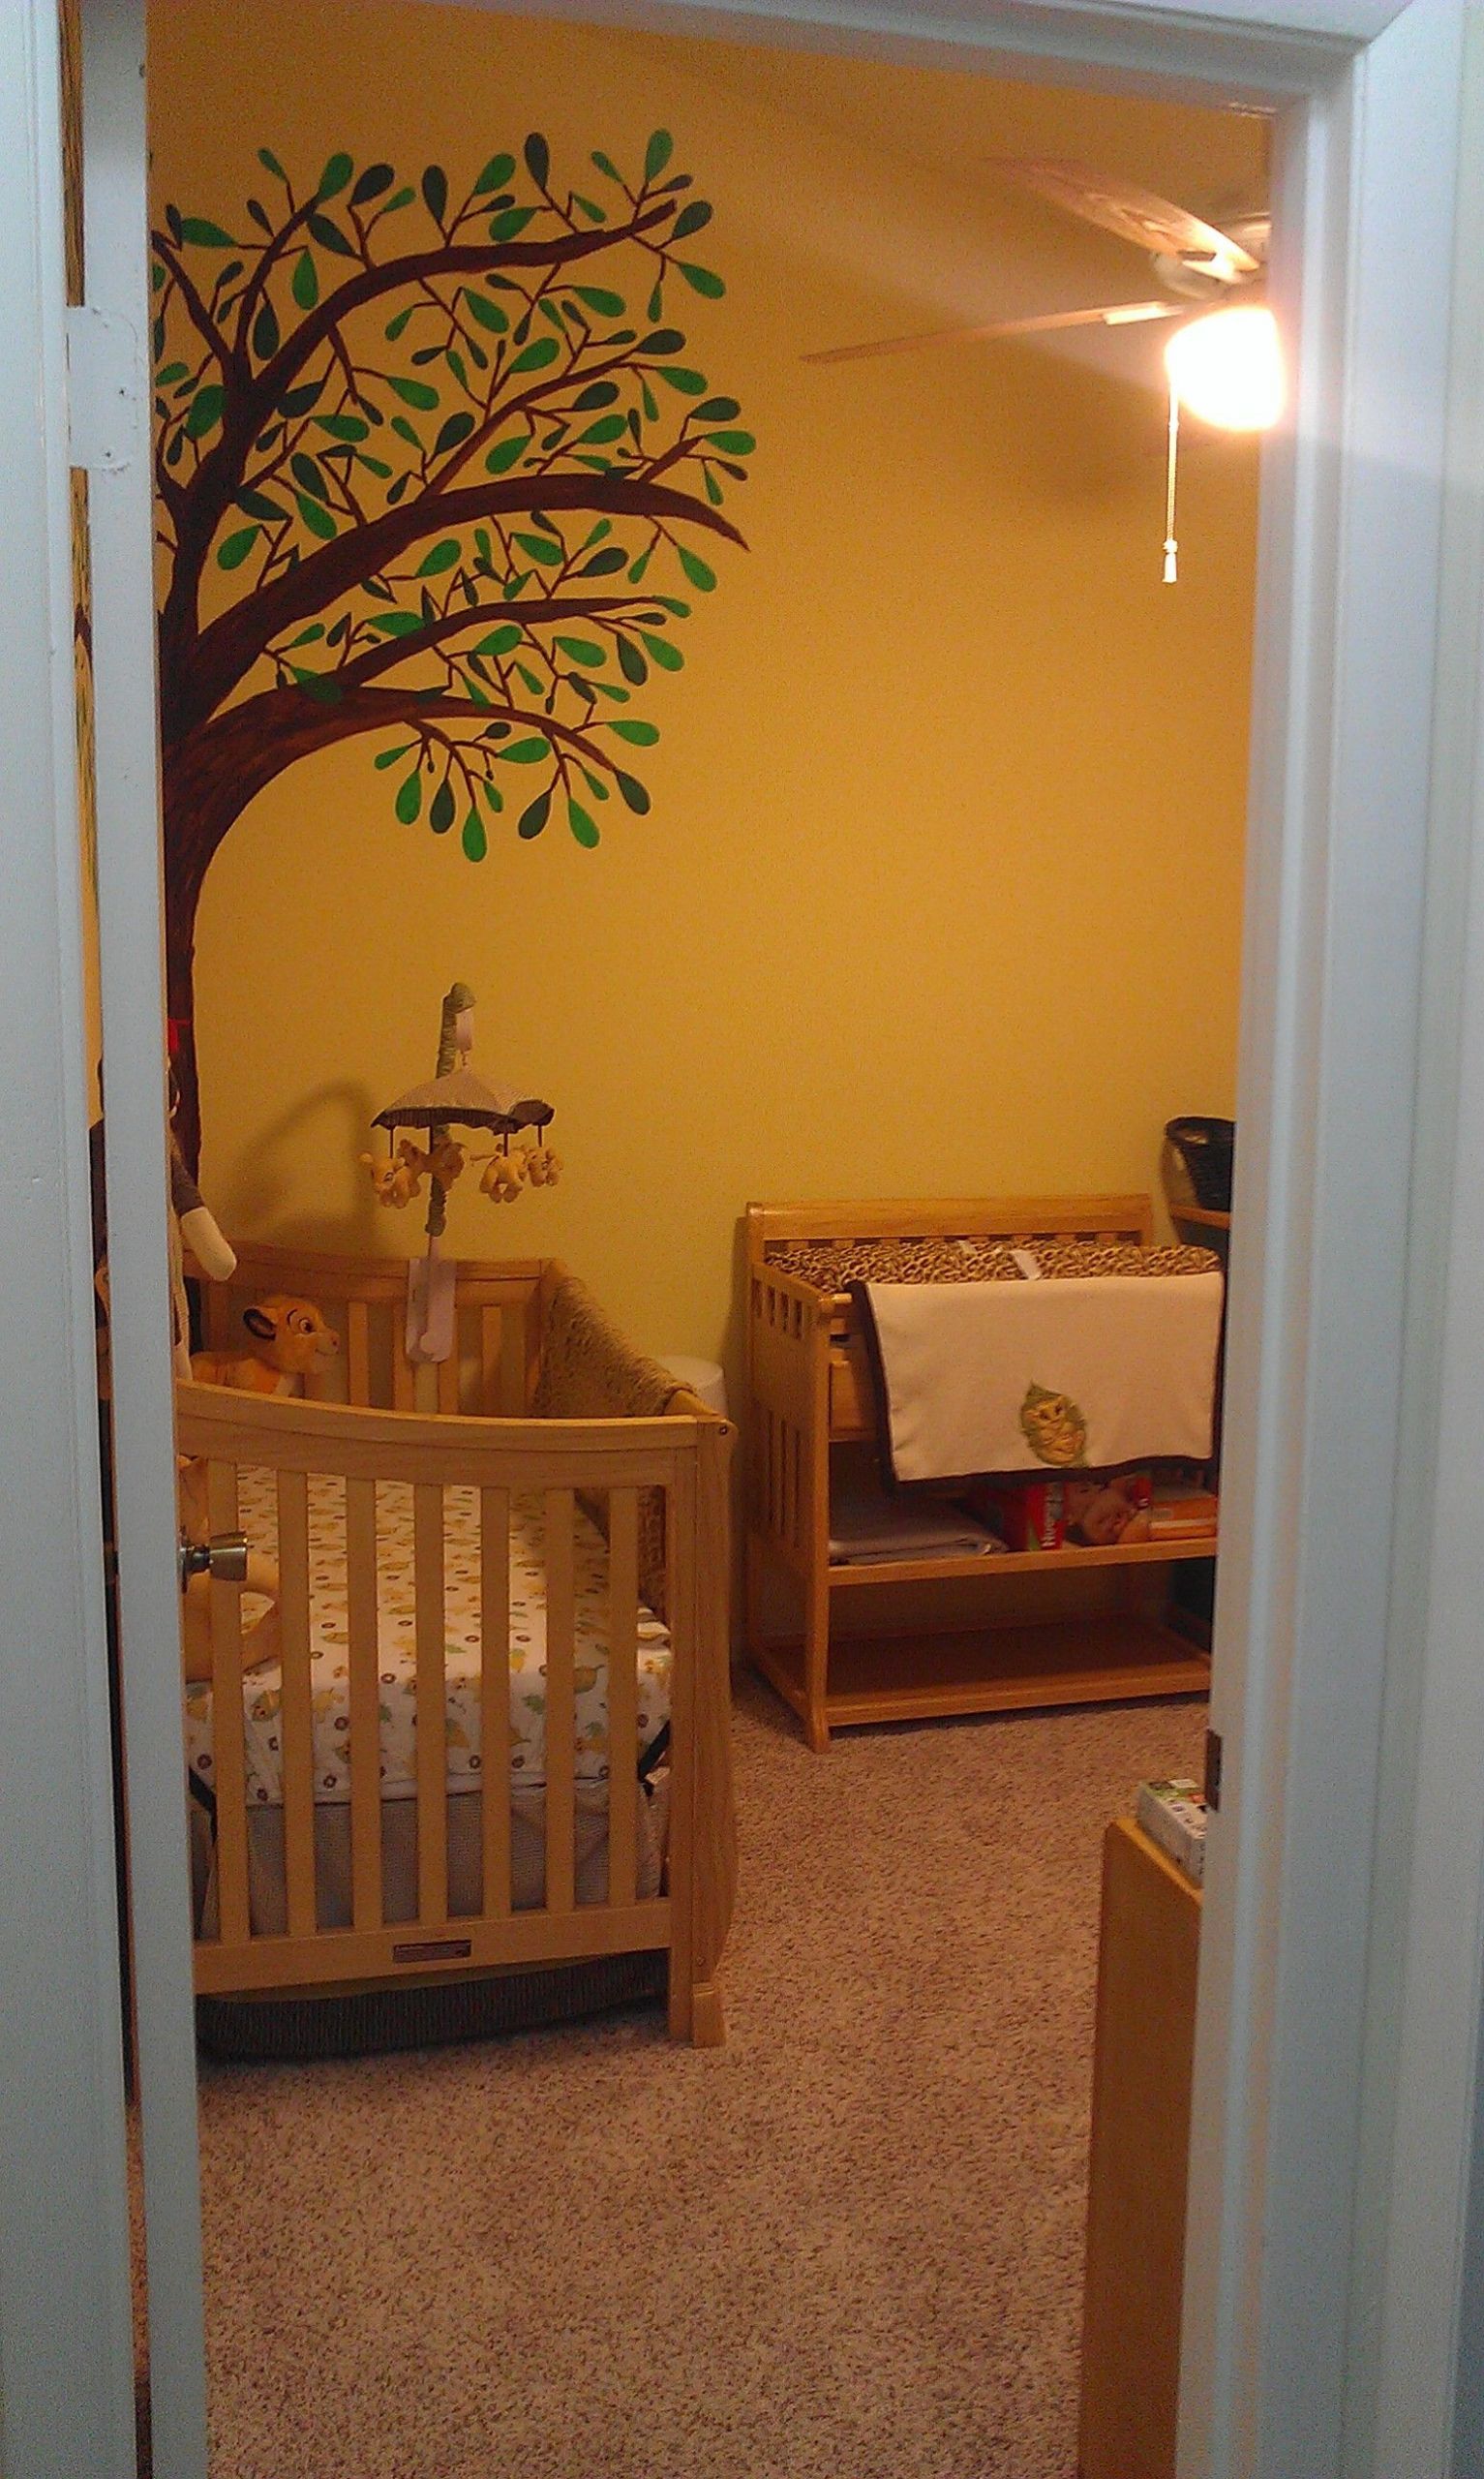 Lion King Baby Room Decor
 Lion King themed baby s room